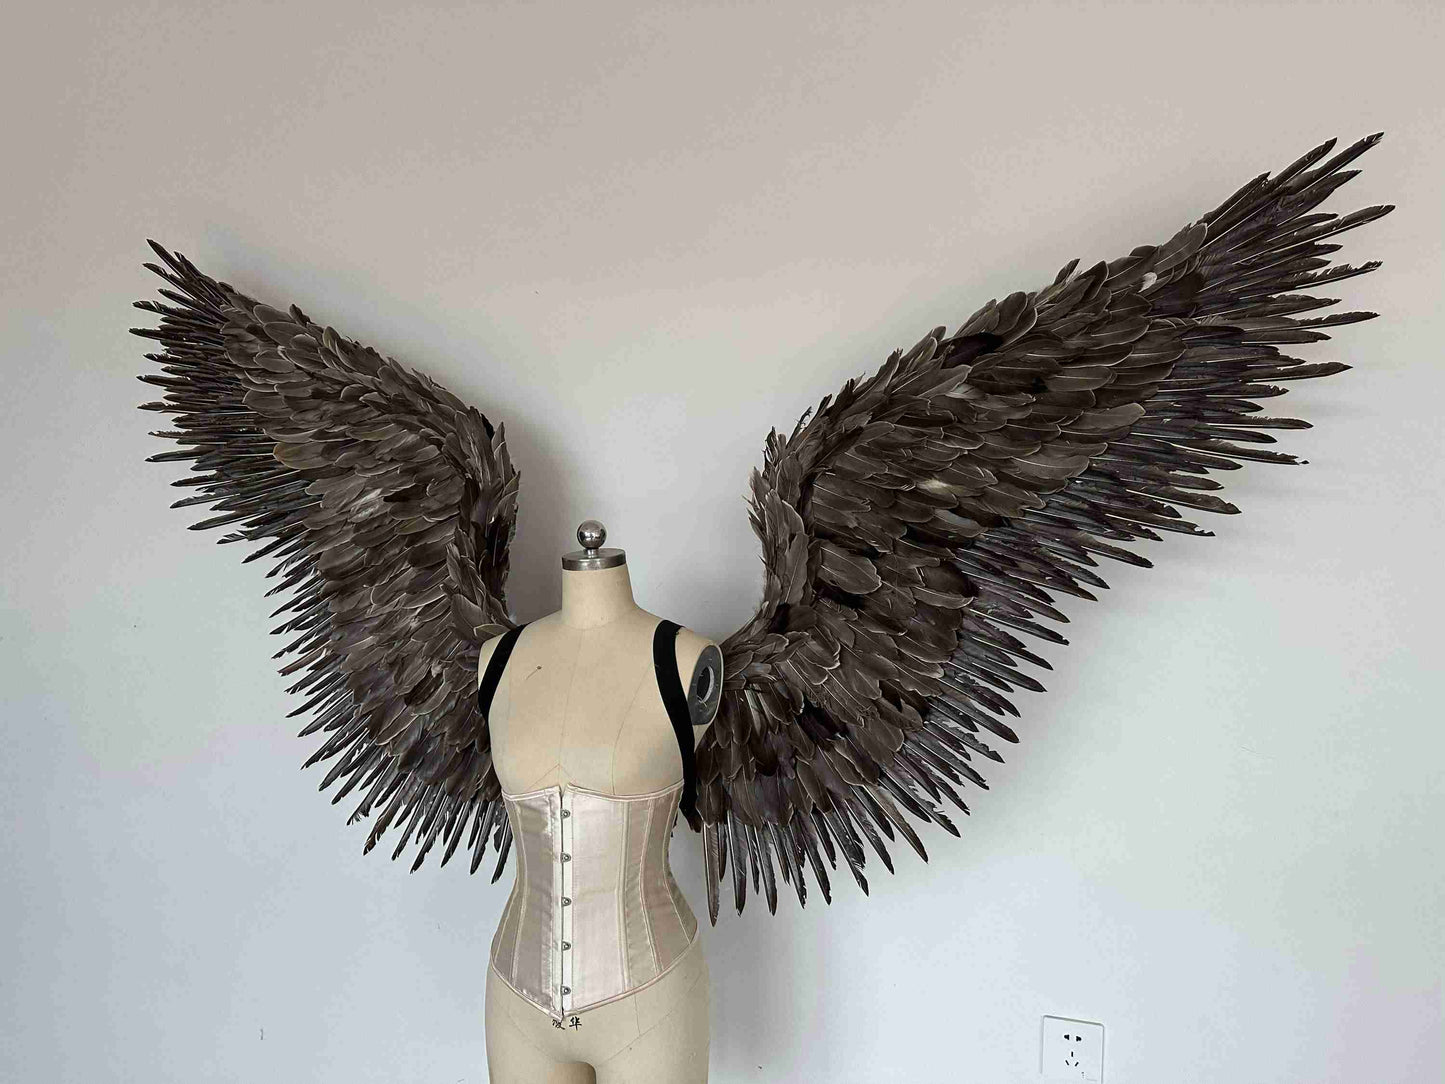 Our grey color angel wings from the center. Made from goose feathers. Wings for angel costume or devil costume. Suitable for photoshoots.